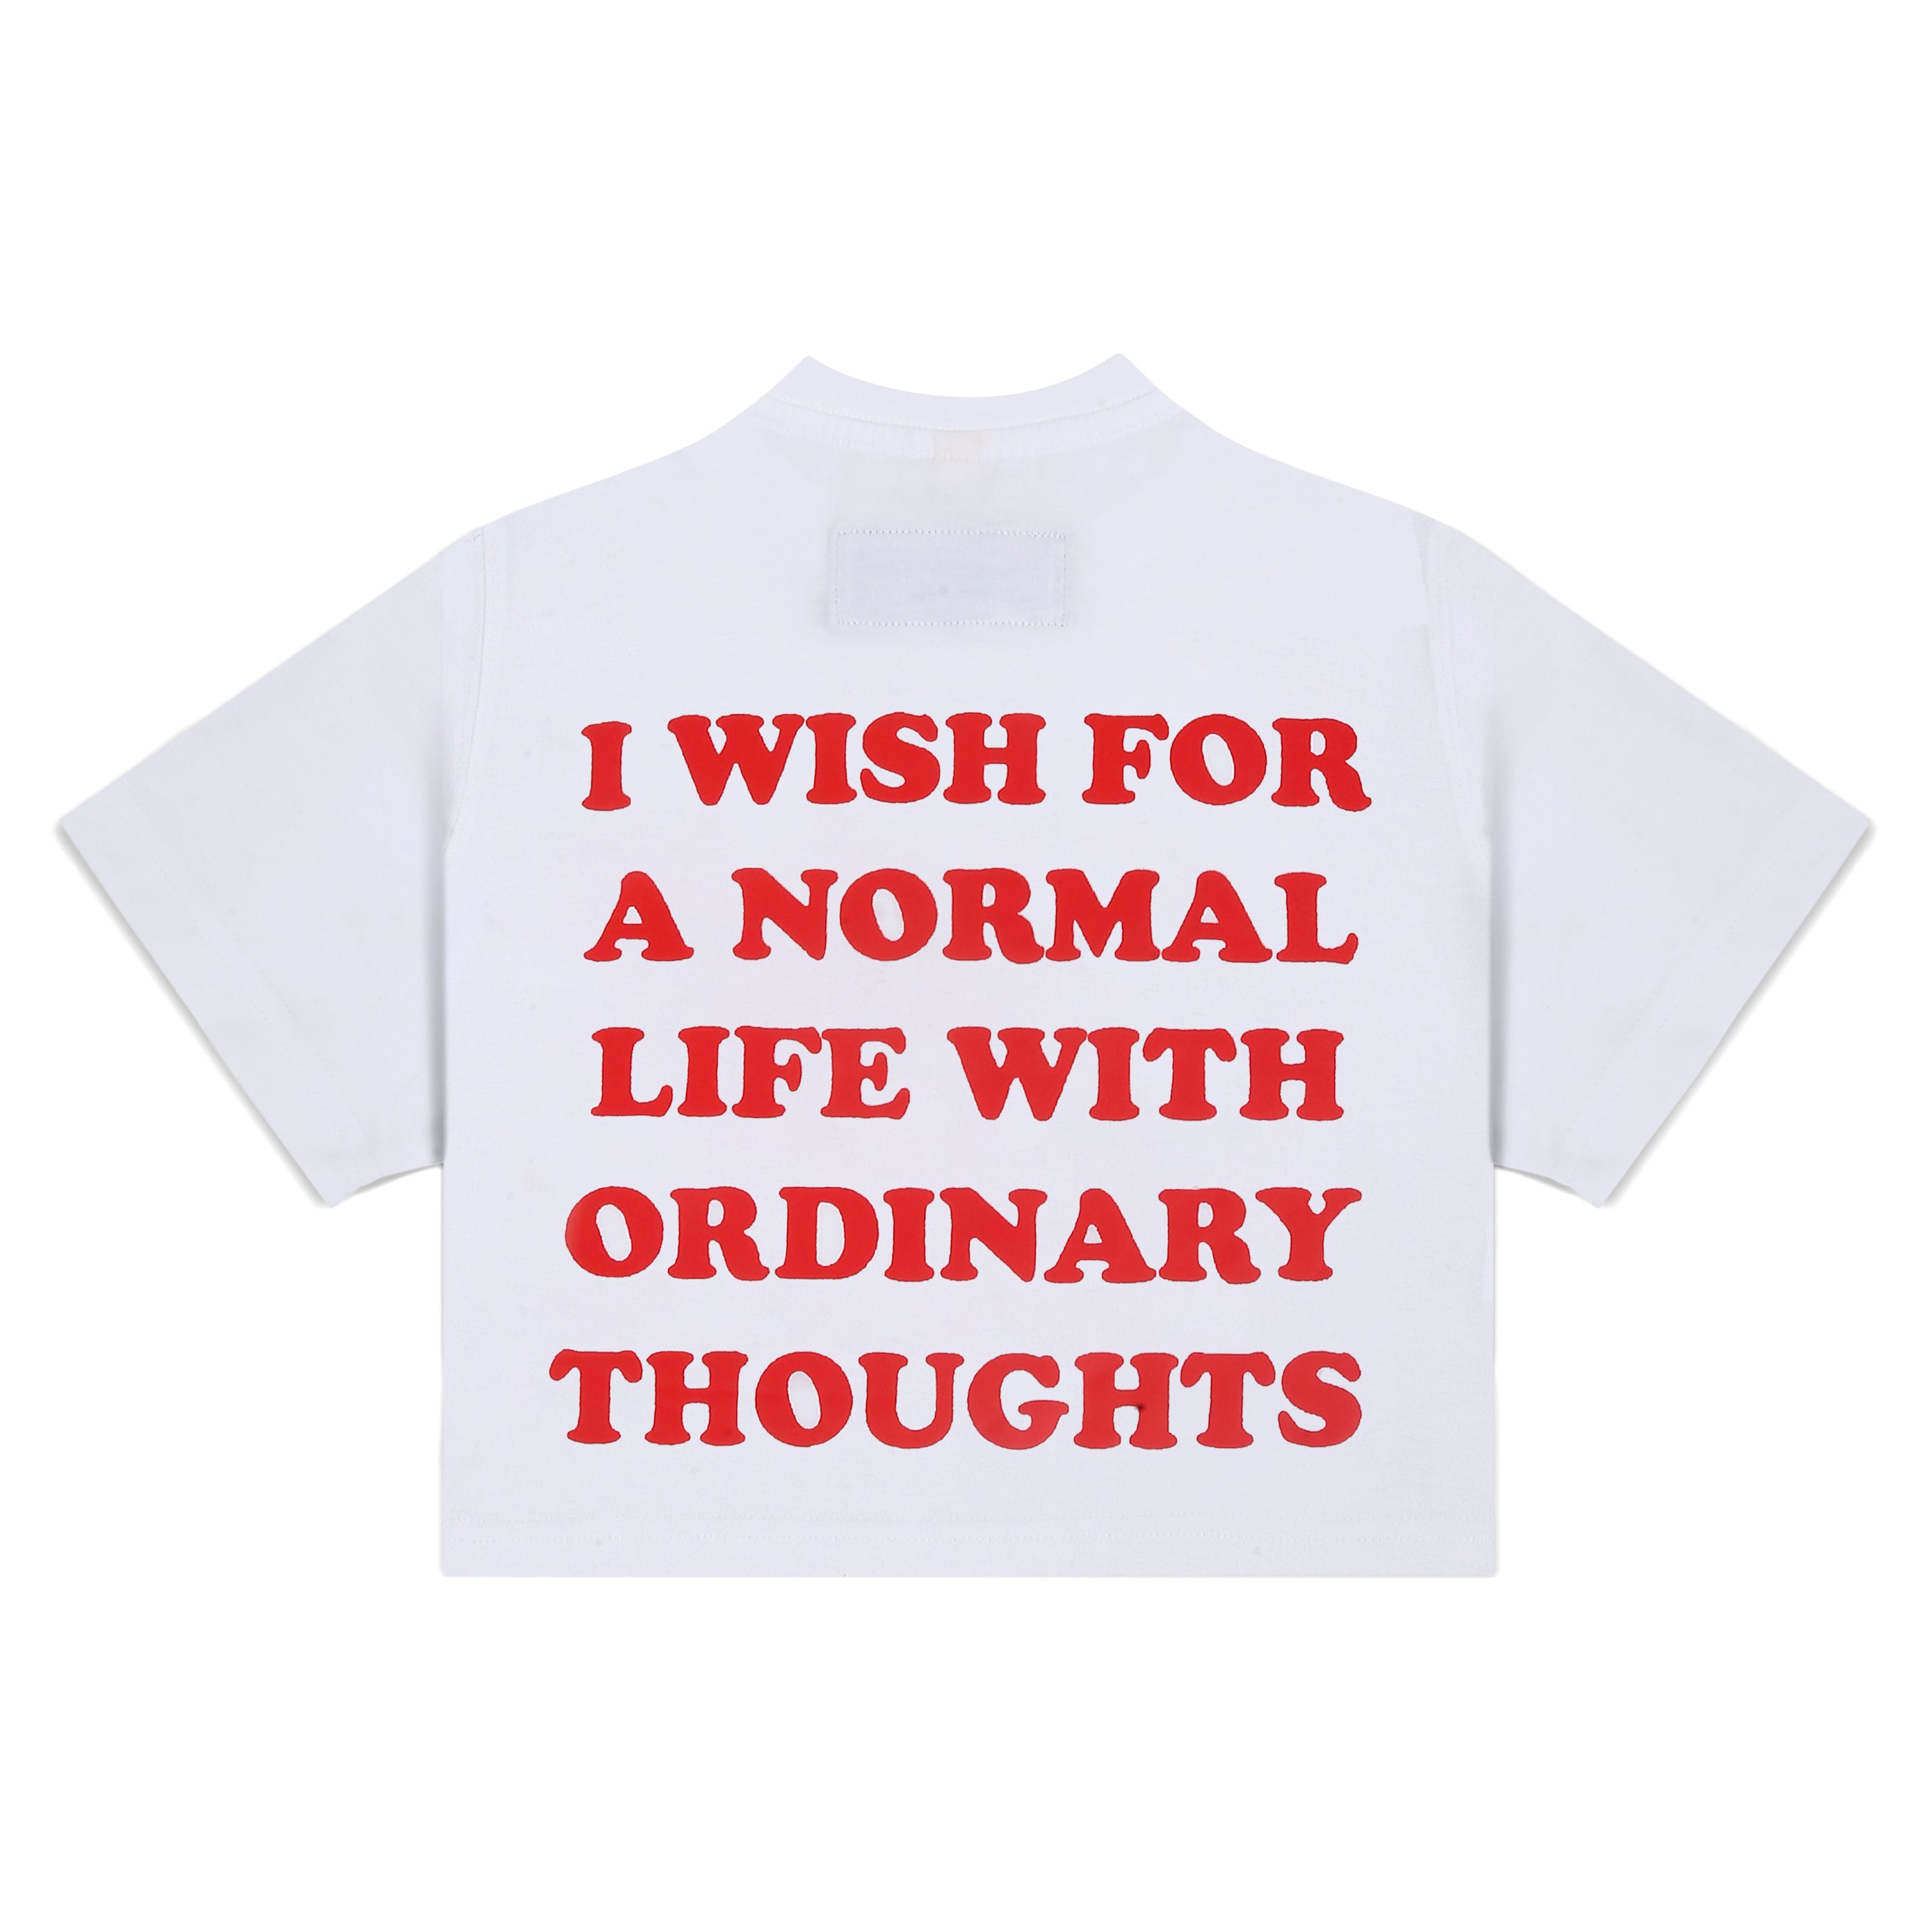 I wish to be normal - Croptop